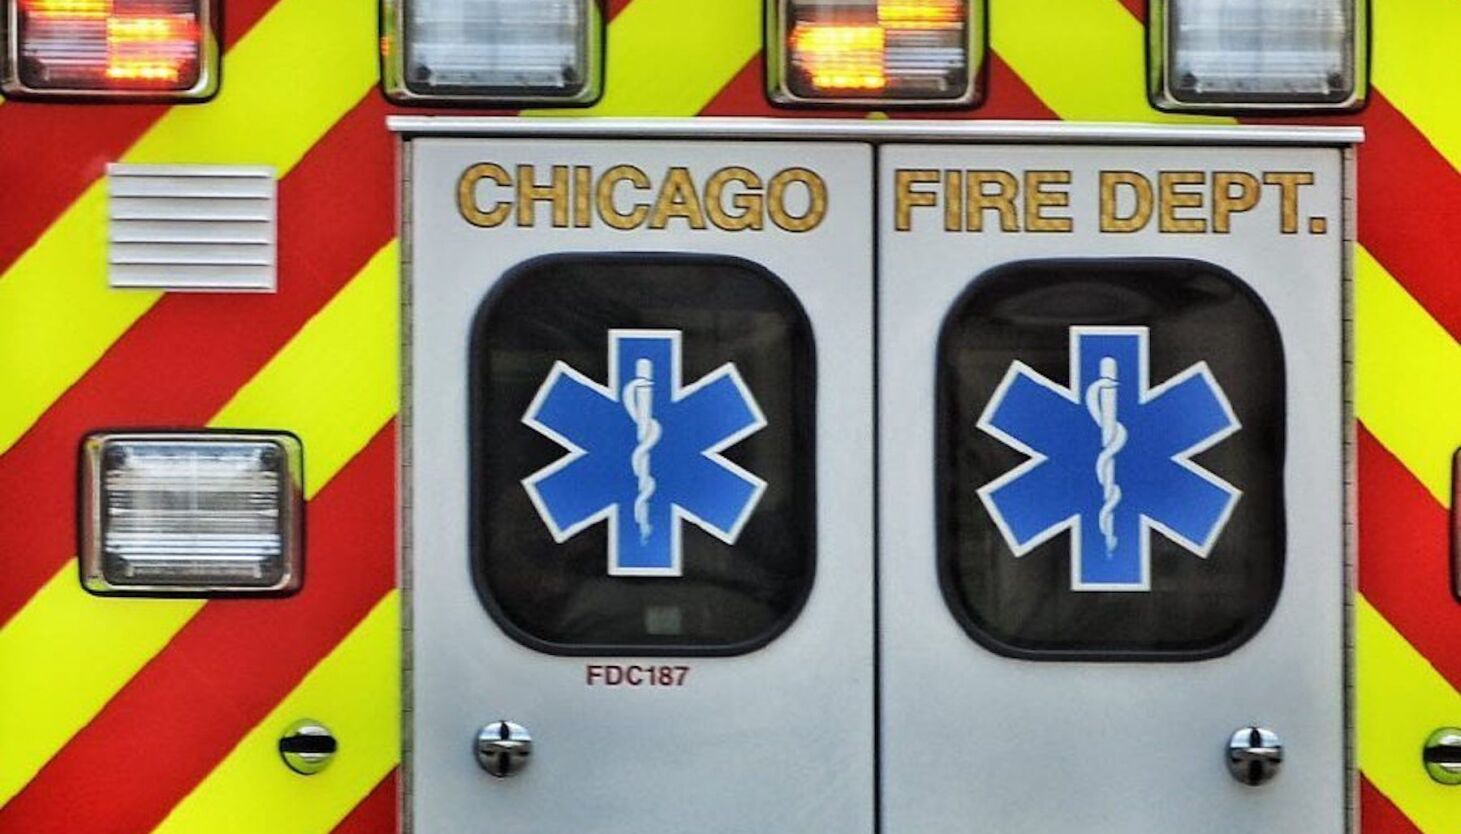 A man attacked with a construction sign while riding his bicycle in the South Loop